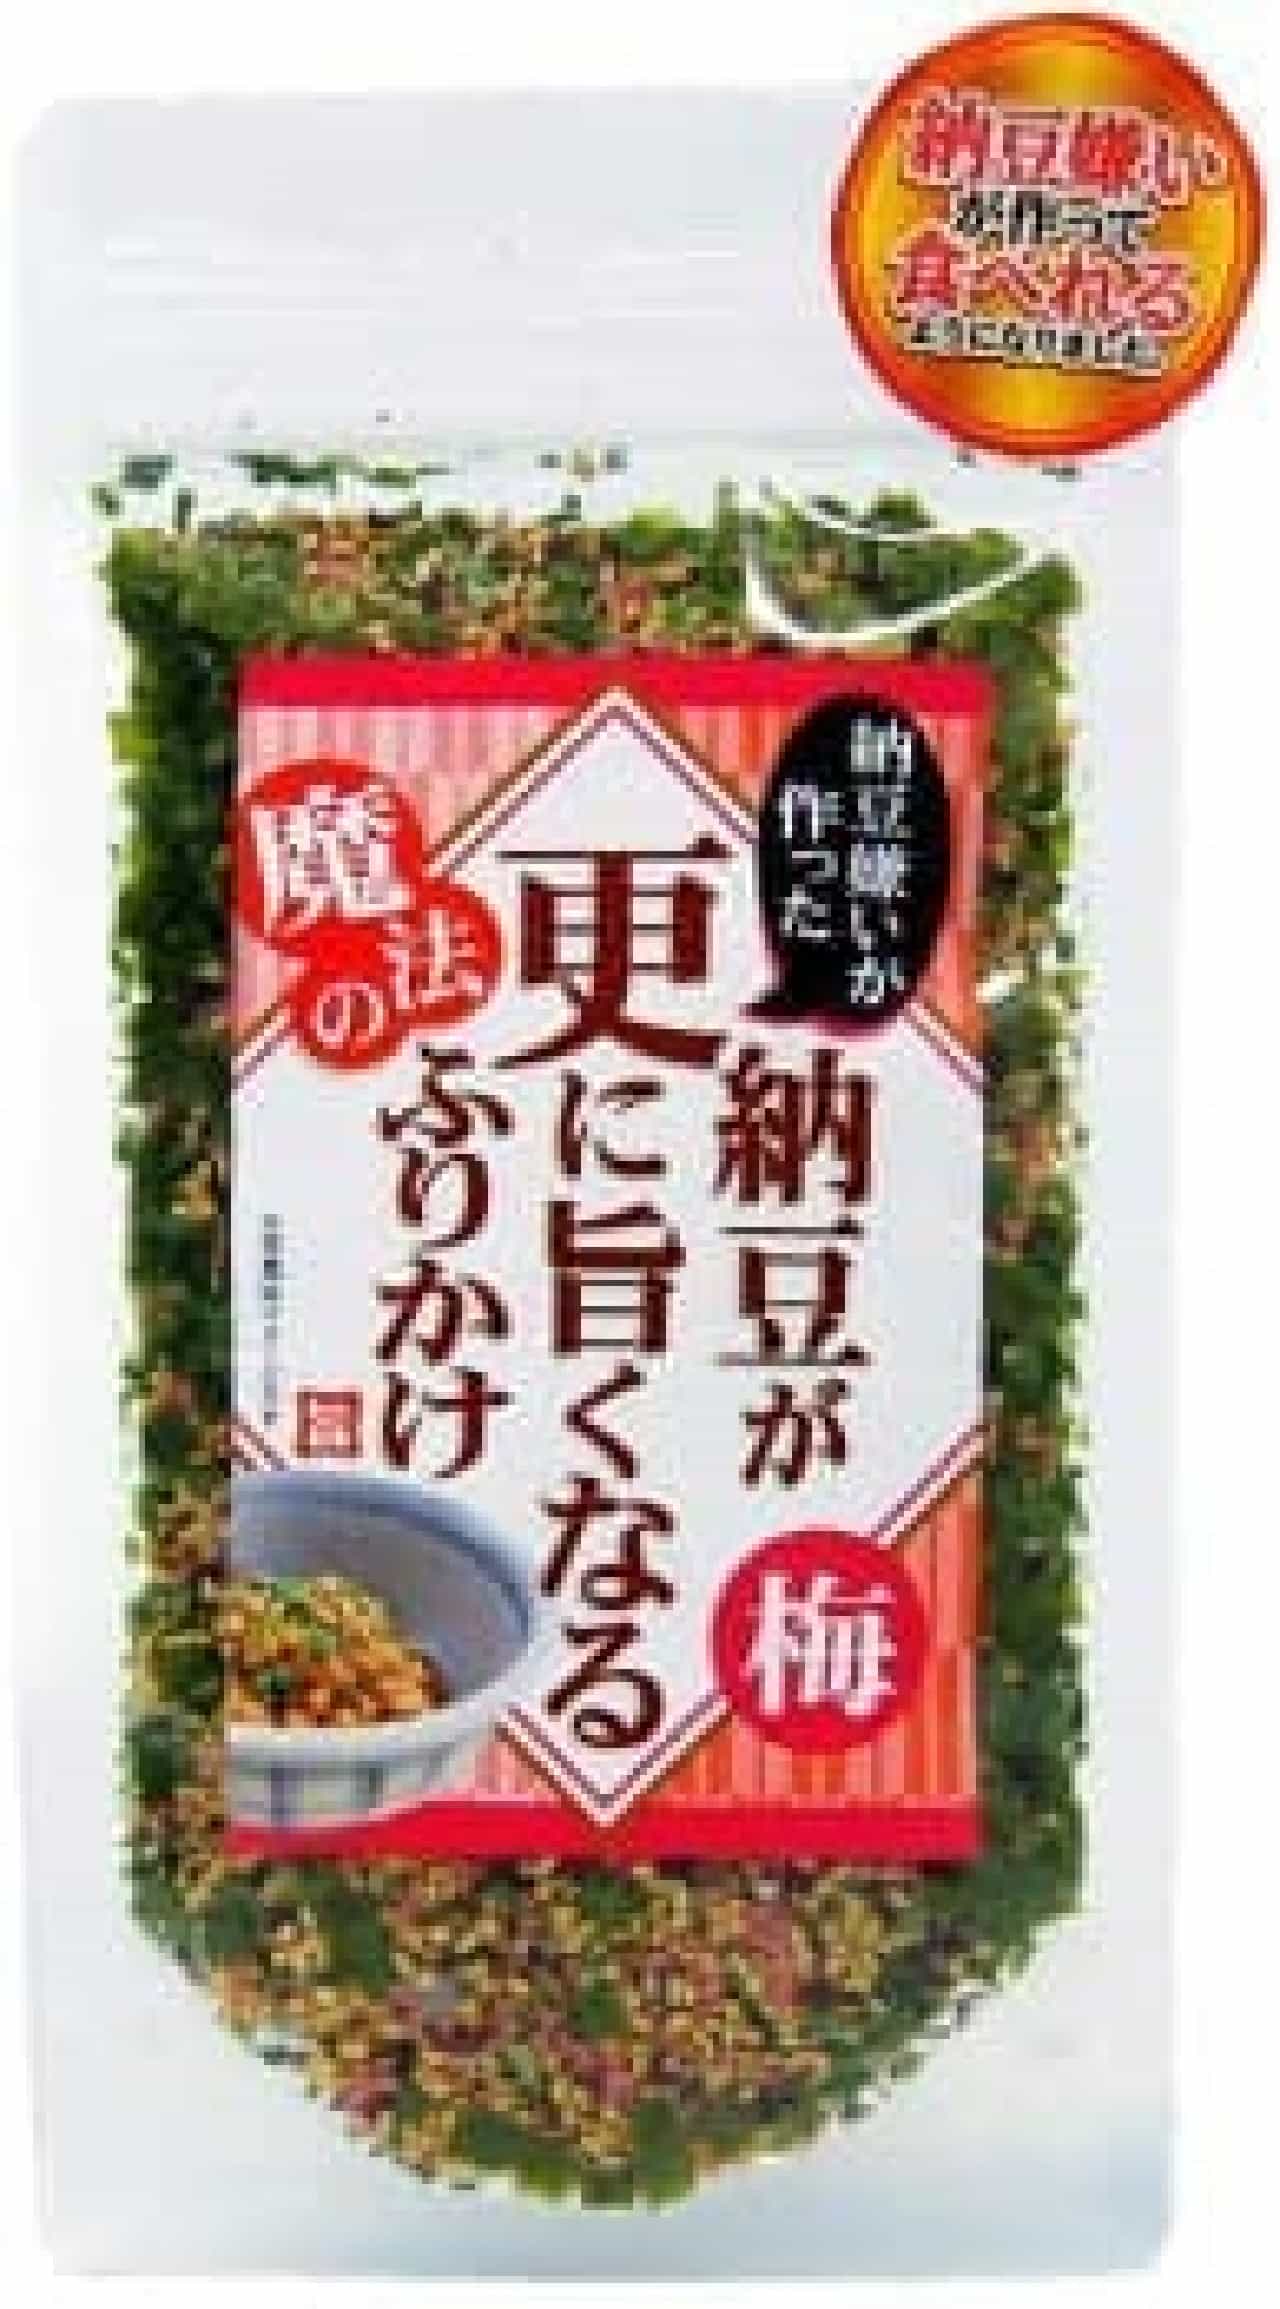 This is also recommended for people who don't like eating "ume"